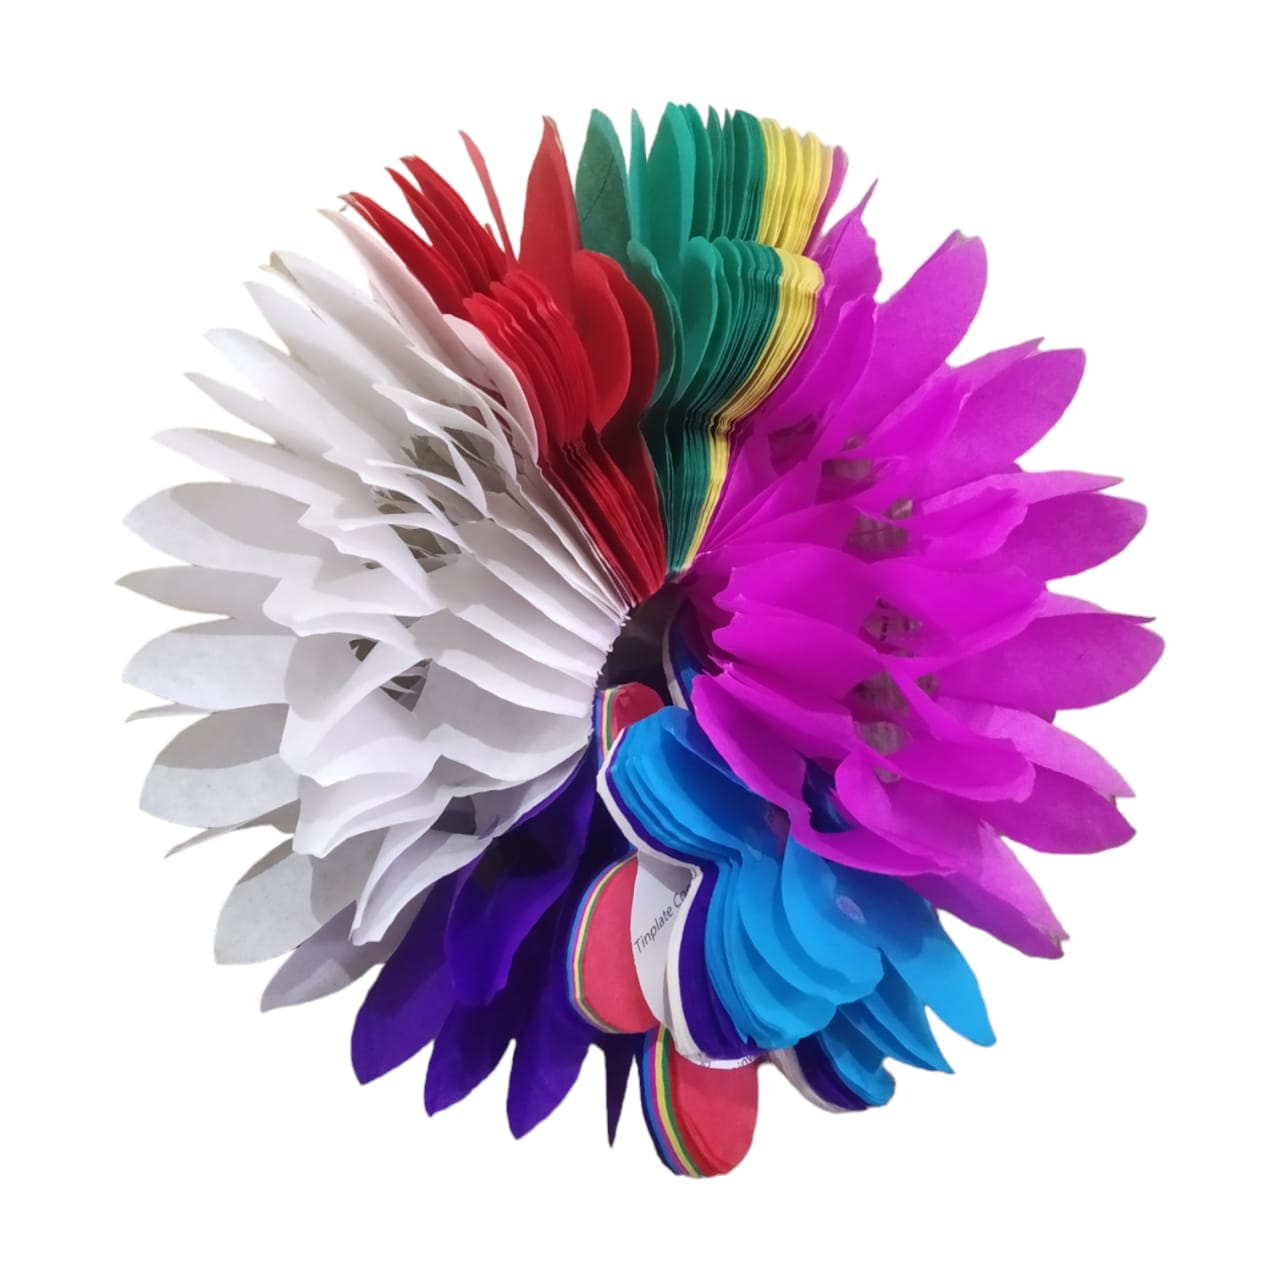 Inkarto Decoration Reusable Party Streamers Garland - Multicolor, 3 Meters (Pack of 1)